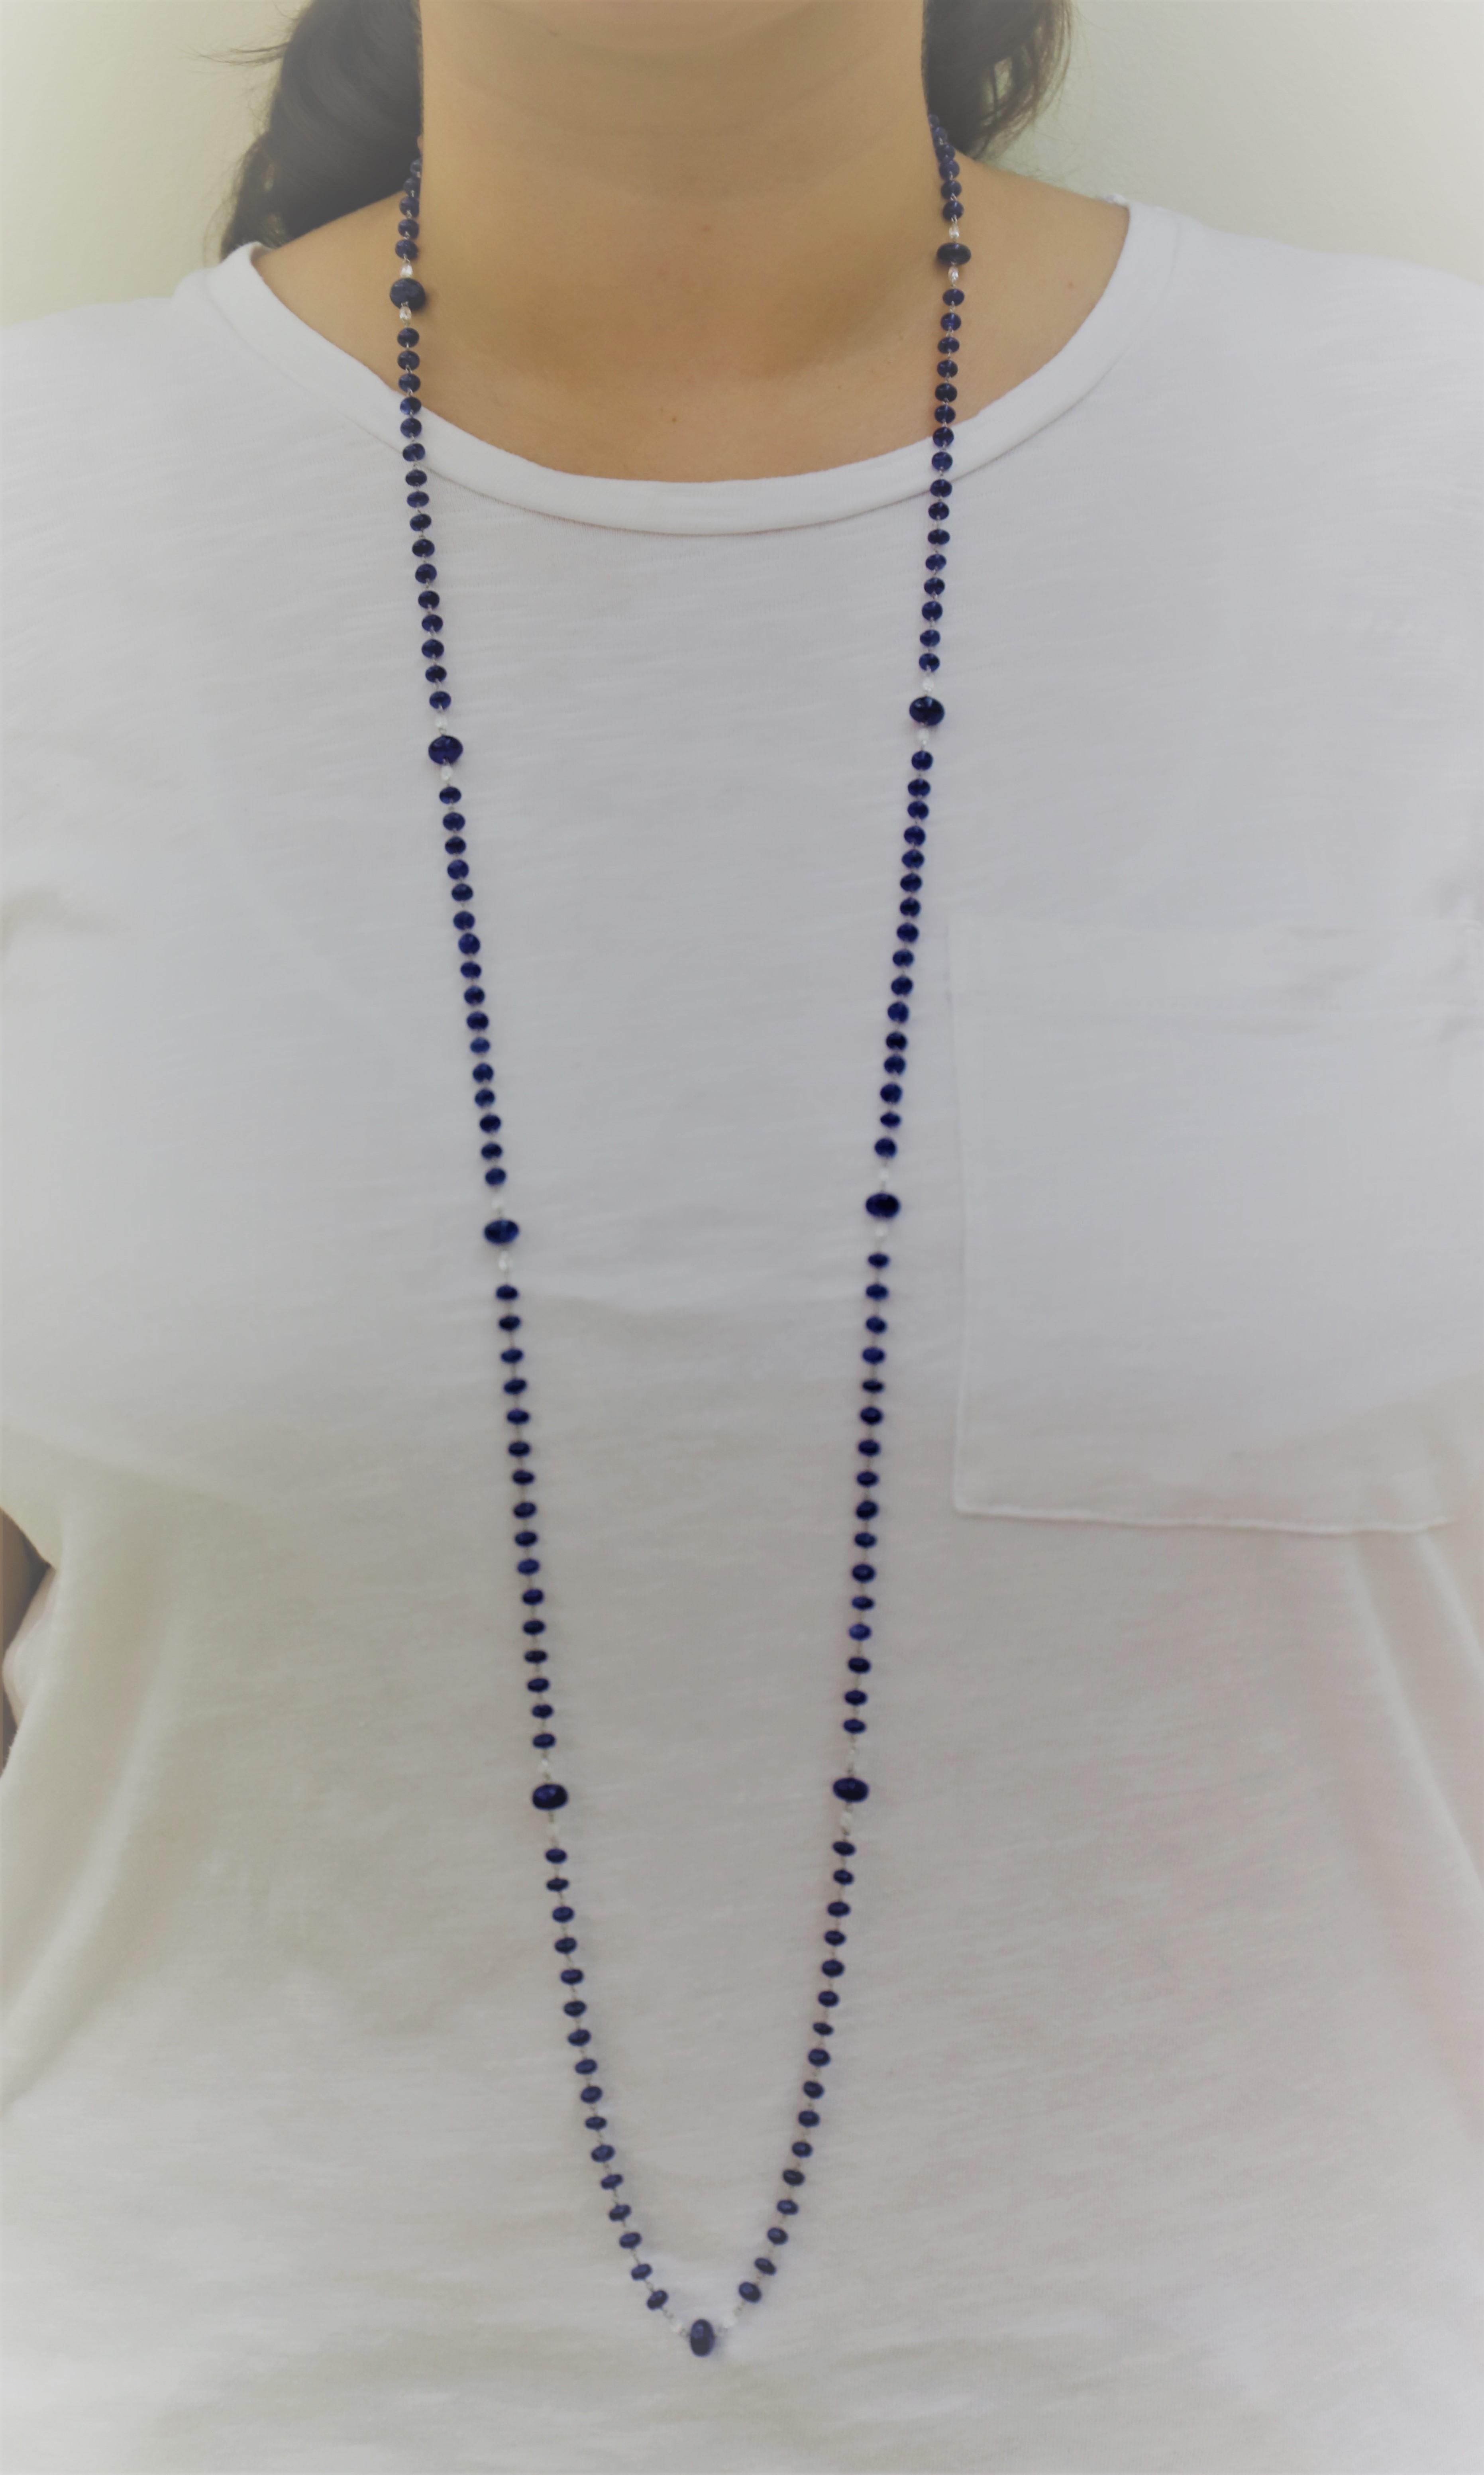 48 inches Long Blue Sapphire Beaded Necklace composed of Blue Sapphire Beads, for 159.97 Carat total, spaced out by White Diamond Briolette, for  4.16 Carat total.

The length of this Sapphire Beaded Necklace allows it to be worn in many different